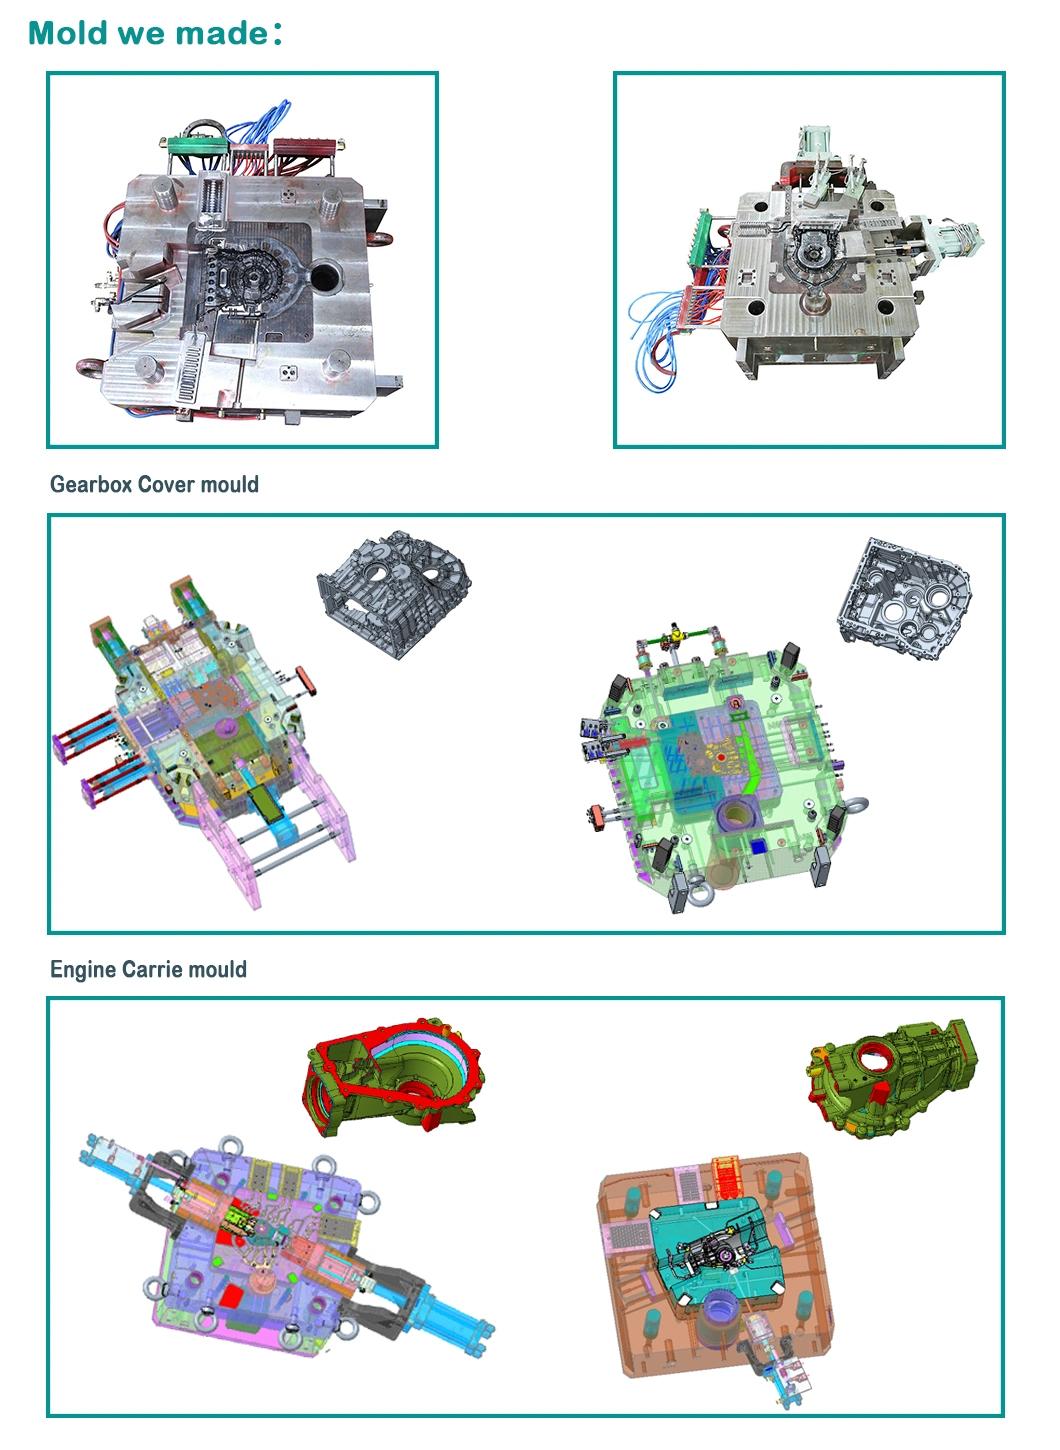 Hpdc Aluminium Casting Mould Die Casting Die Die Casting Mould Injection Moulding Injection Mould Molds Tooling for Cycles and Parts Electronics Telecom Parts